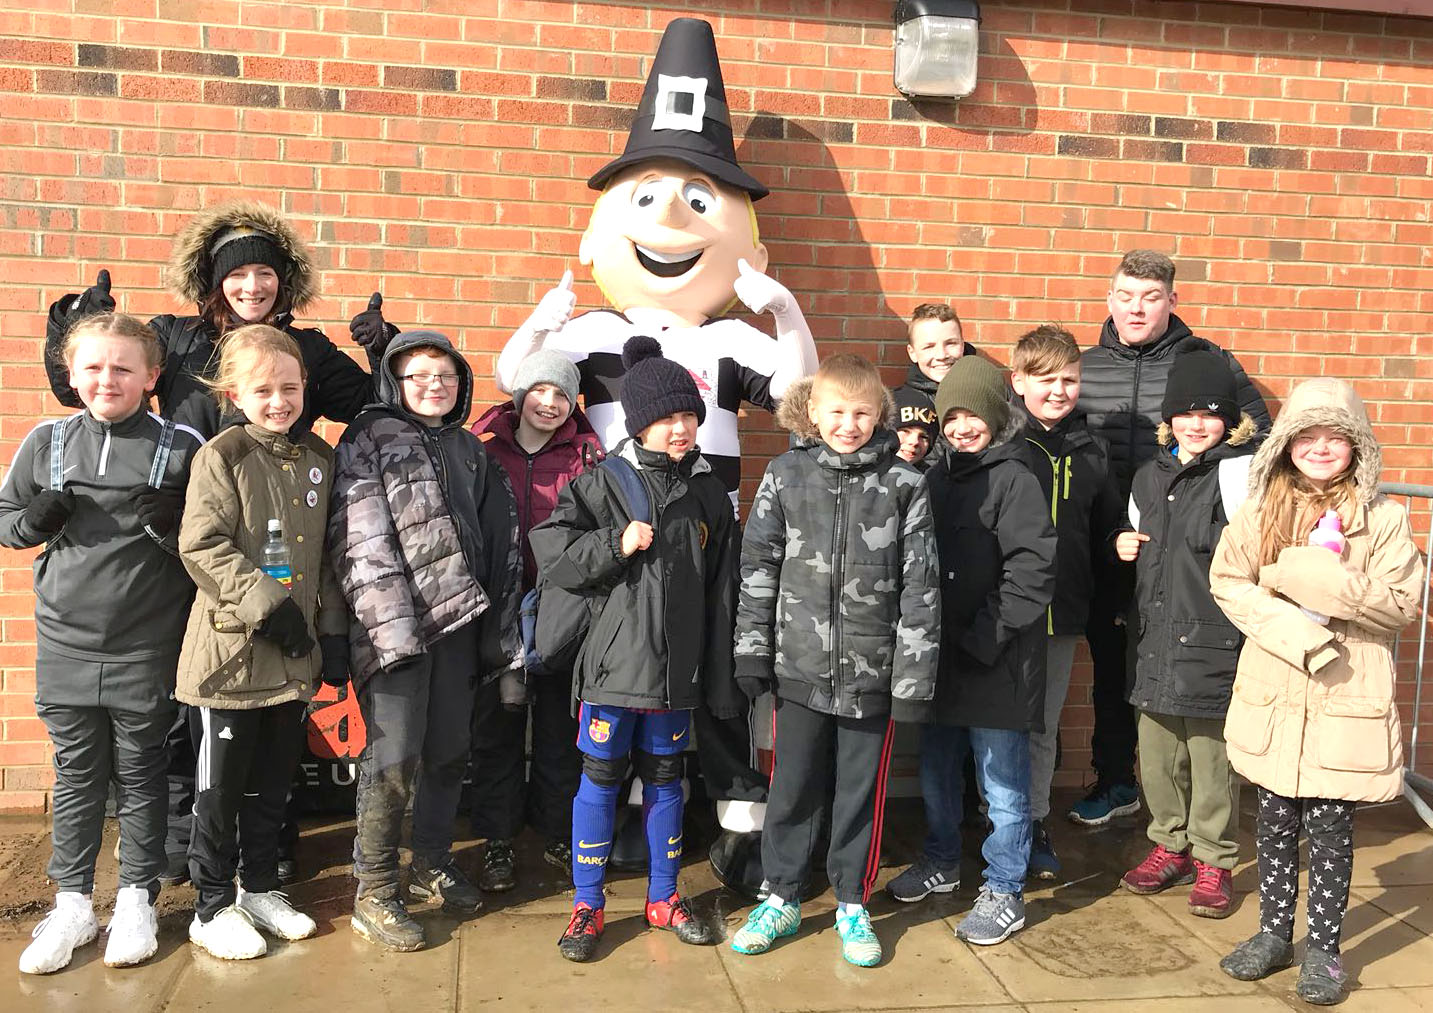 Aycliffe Students’ VIP Match Day Visit to Darlo FC